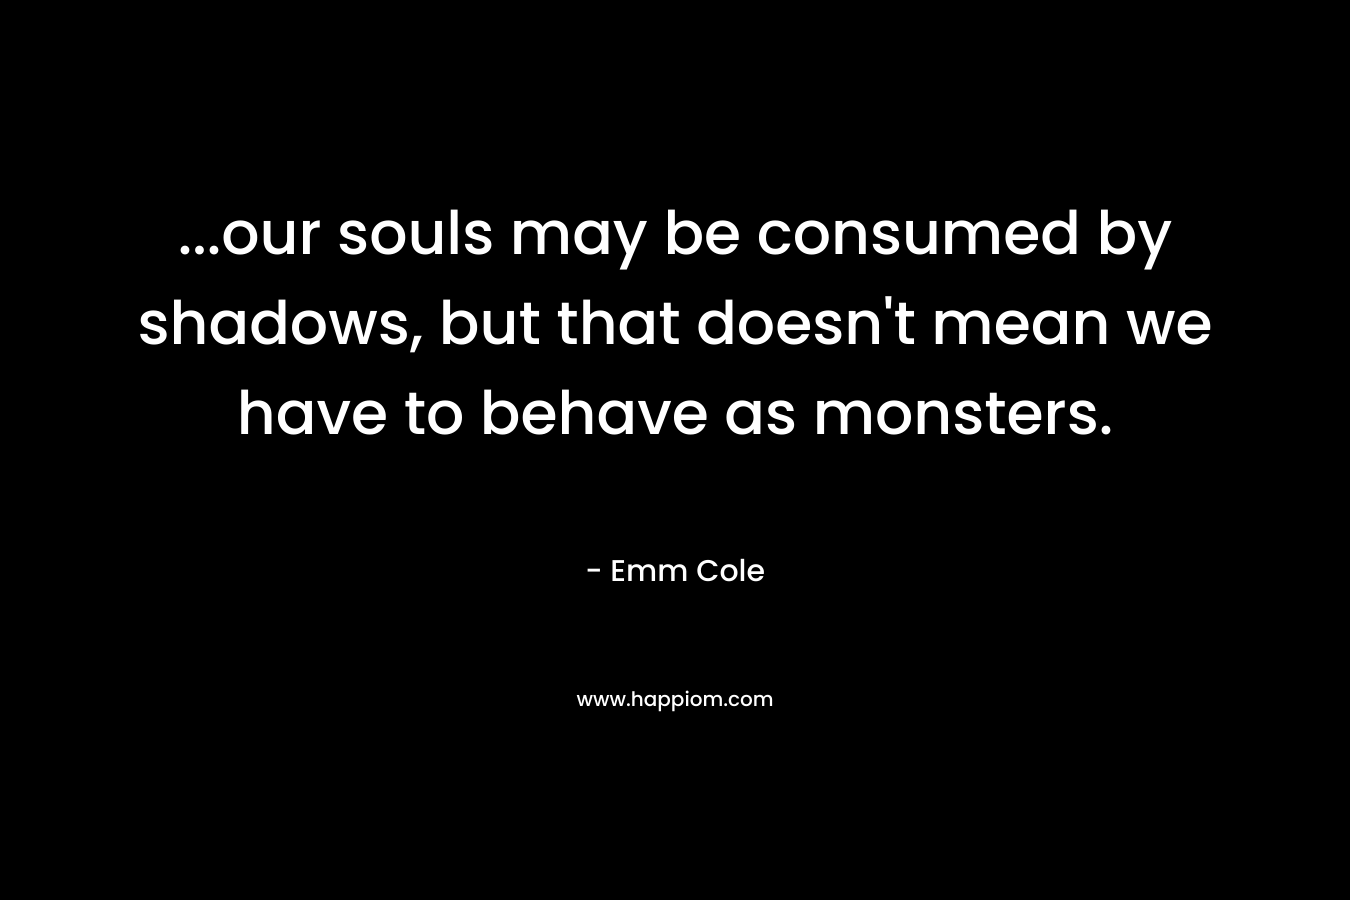 …our souls may be consumed by shadows, but that doesn’t mean we have to behave as monsters. – Emm Cole